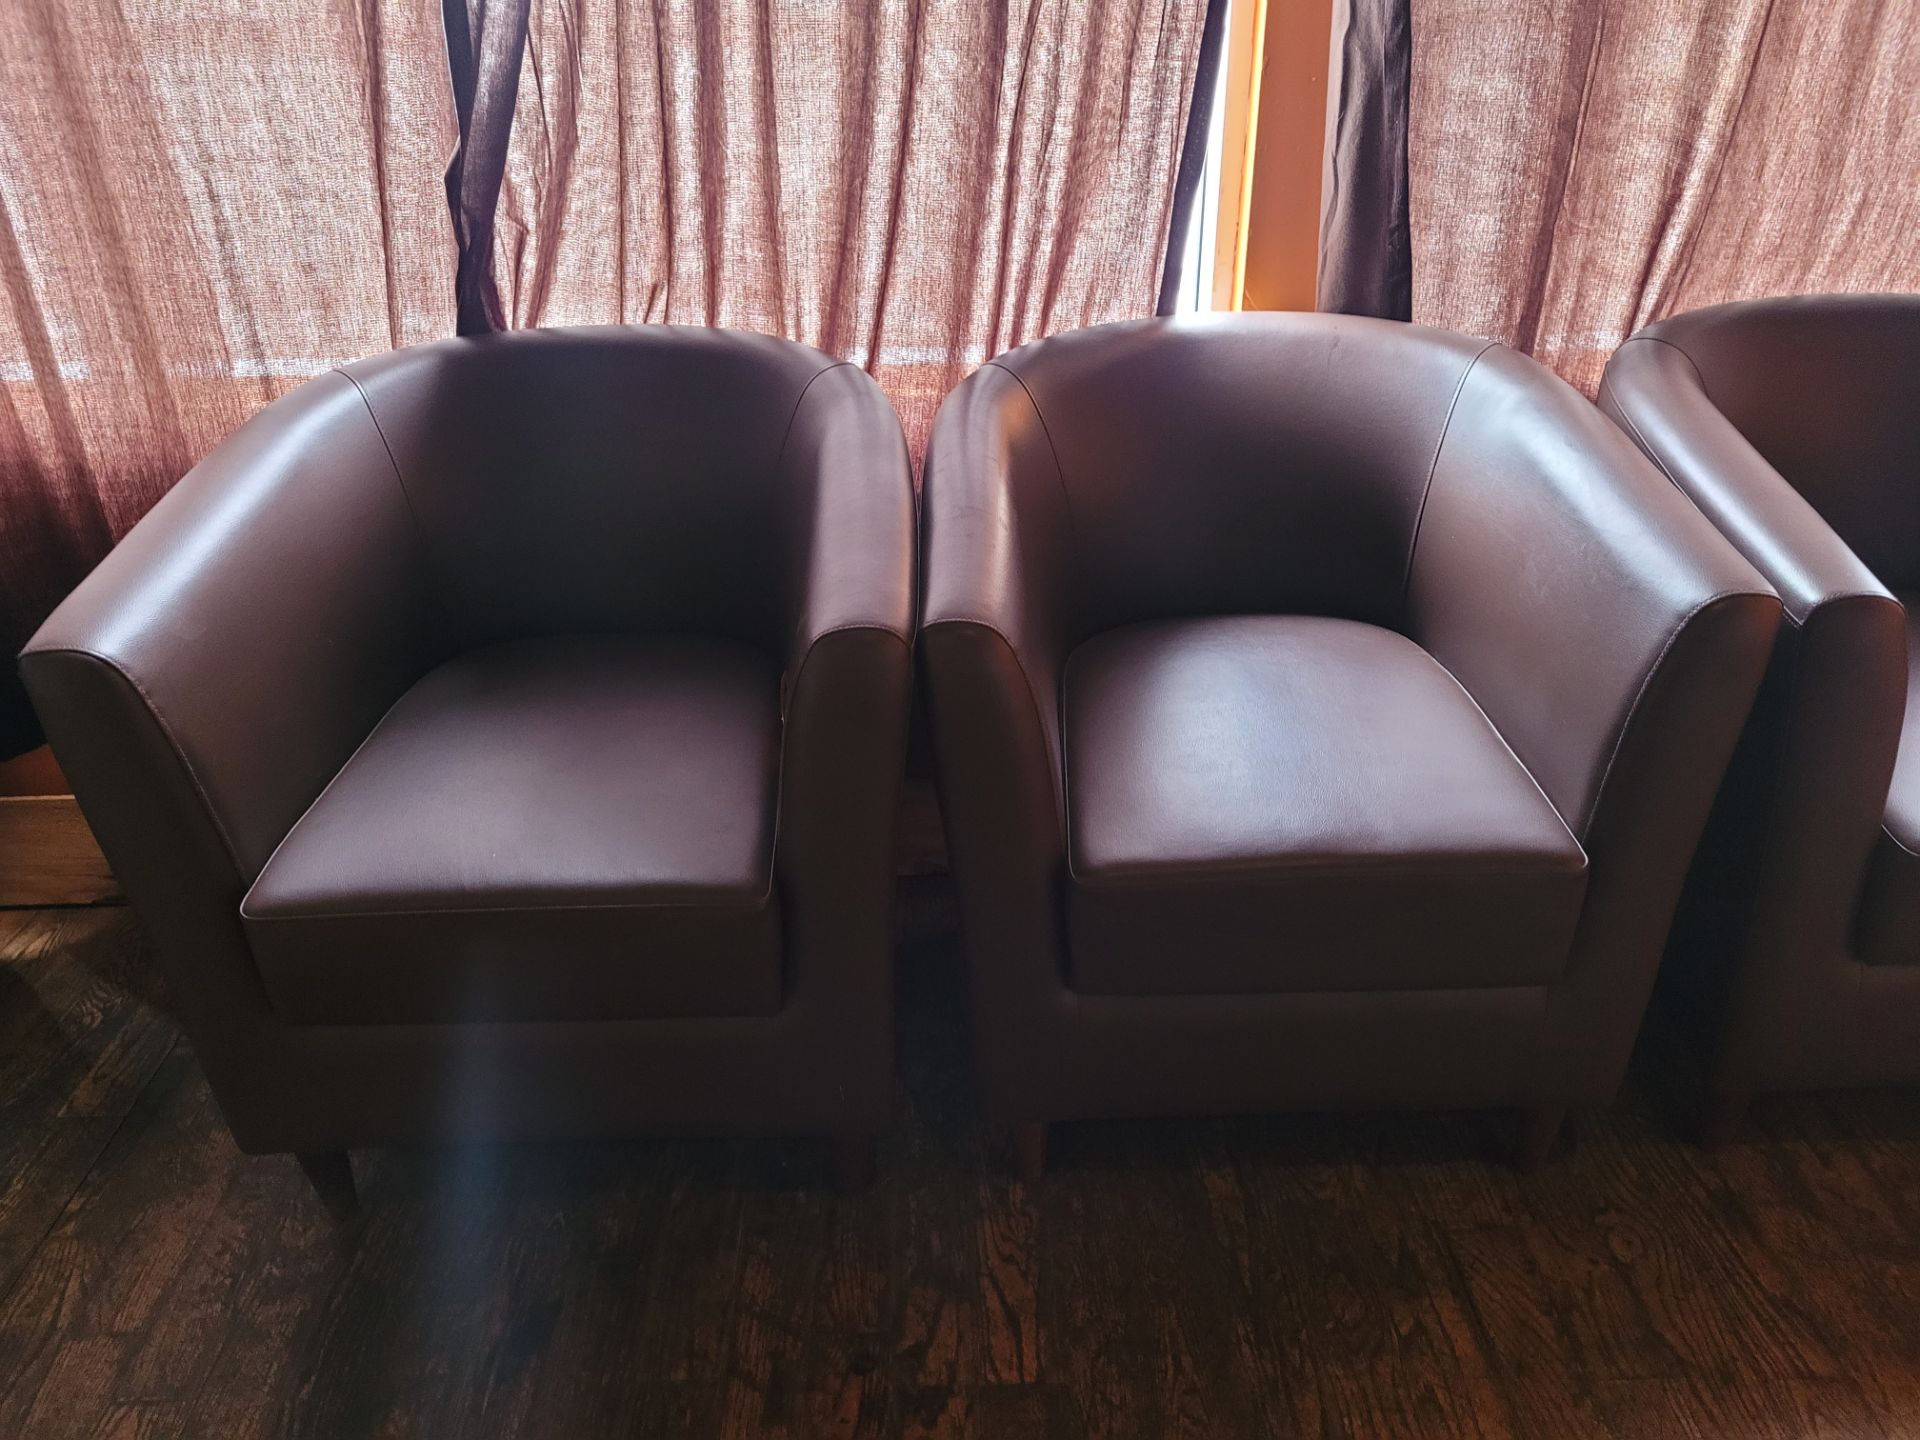 Genuine leather armchairs - Image 4 of 4